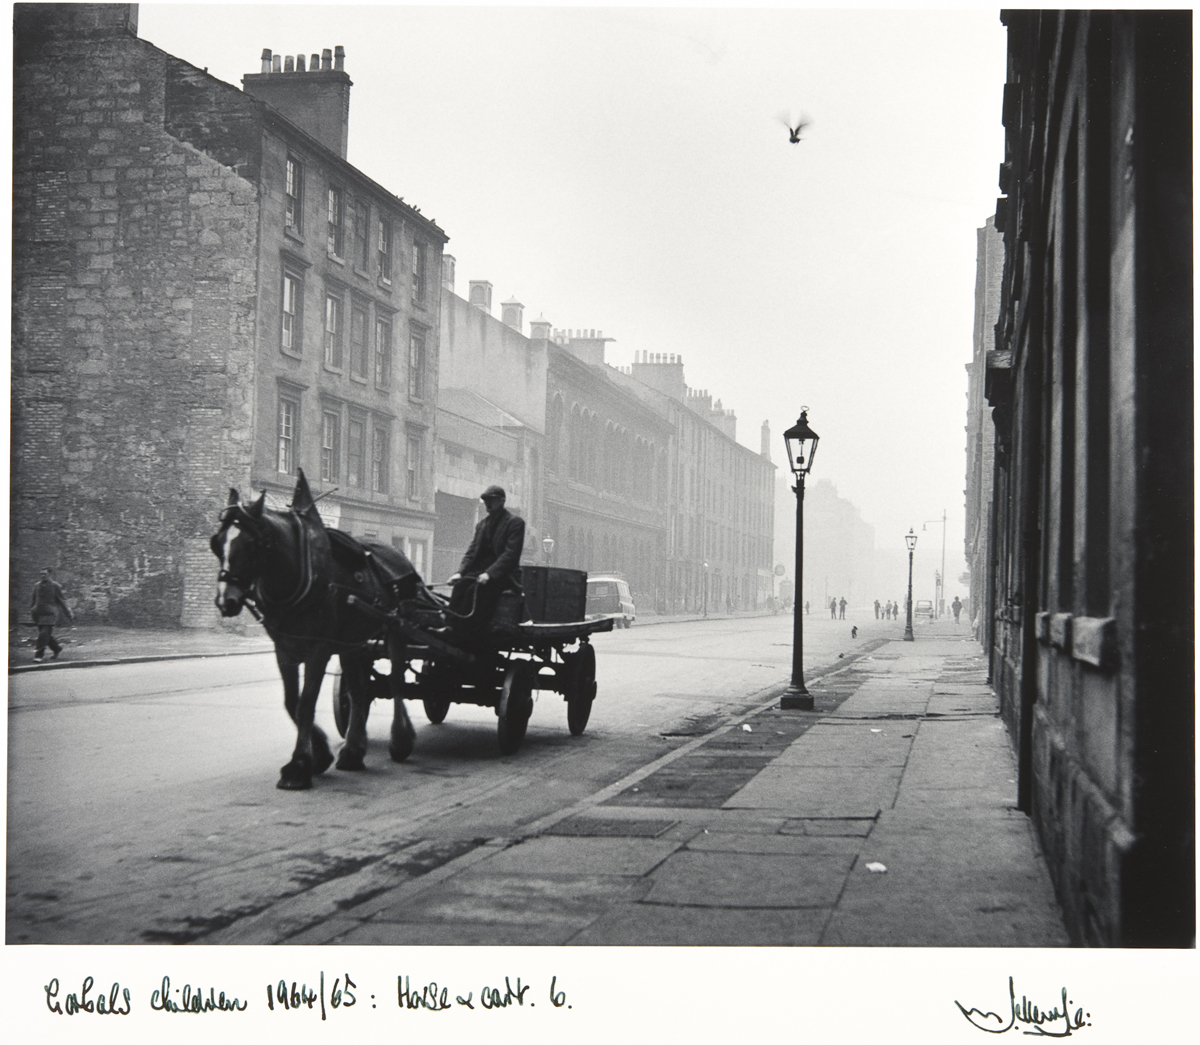     'Horse and Cart, Gorbals' by Joseph McKenzie, 1964-1965. Part of a recent acquisition of a collection of works entitled “Scottish Photography Porfolio I” which was generously donated to the University by the Portfolio Gallery of Edinburgh in 2011